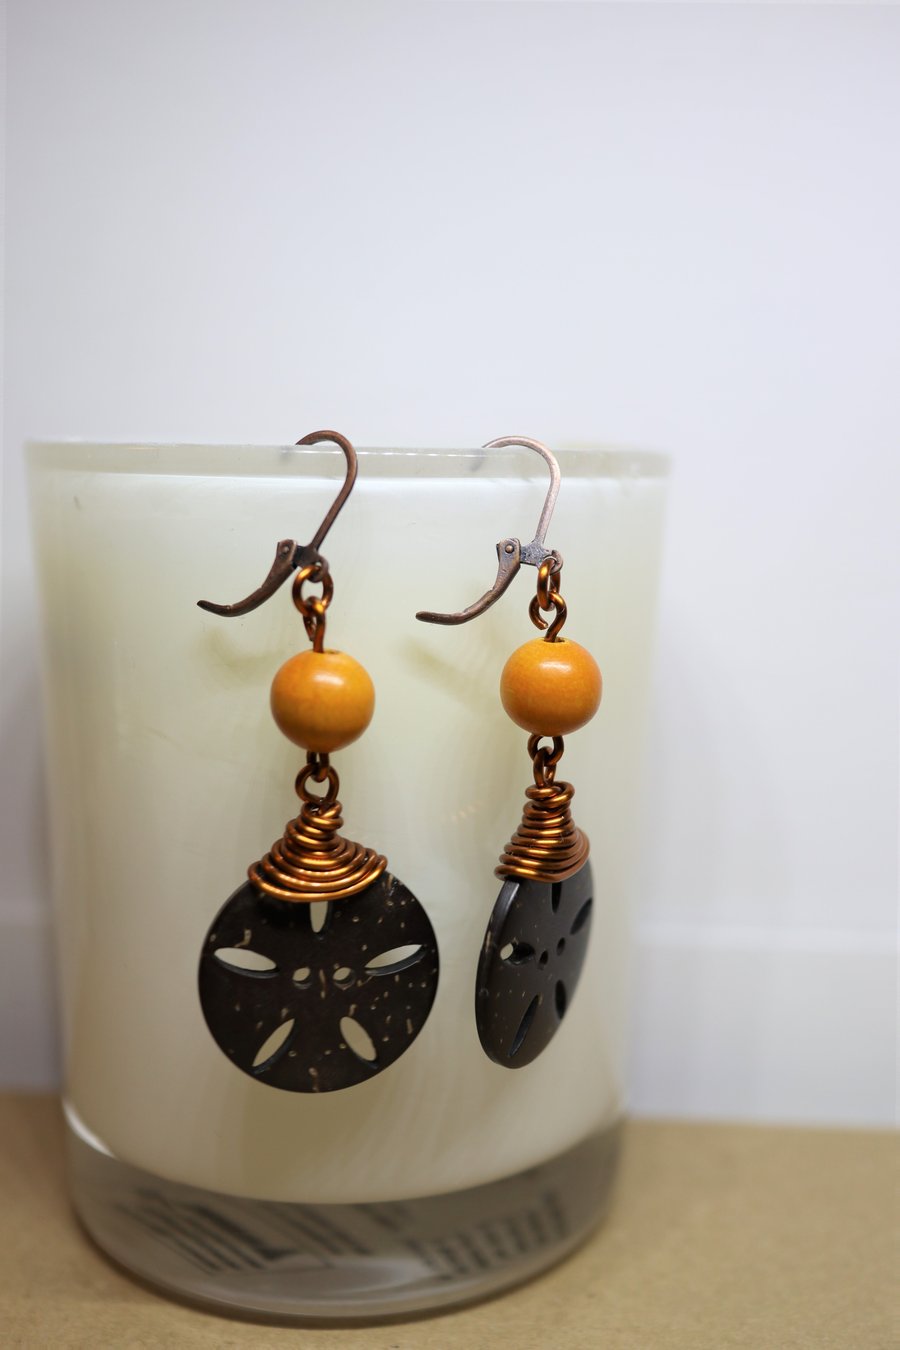 Coconut vintage button - copper wire wrapped and wood bead earrings 